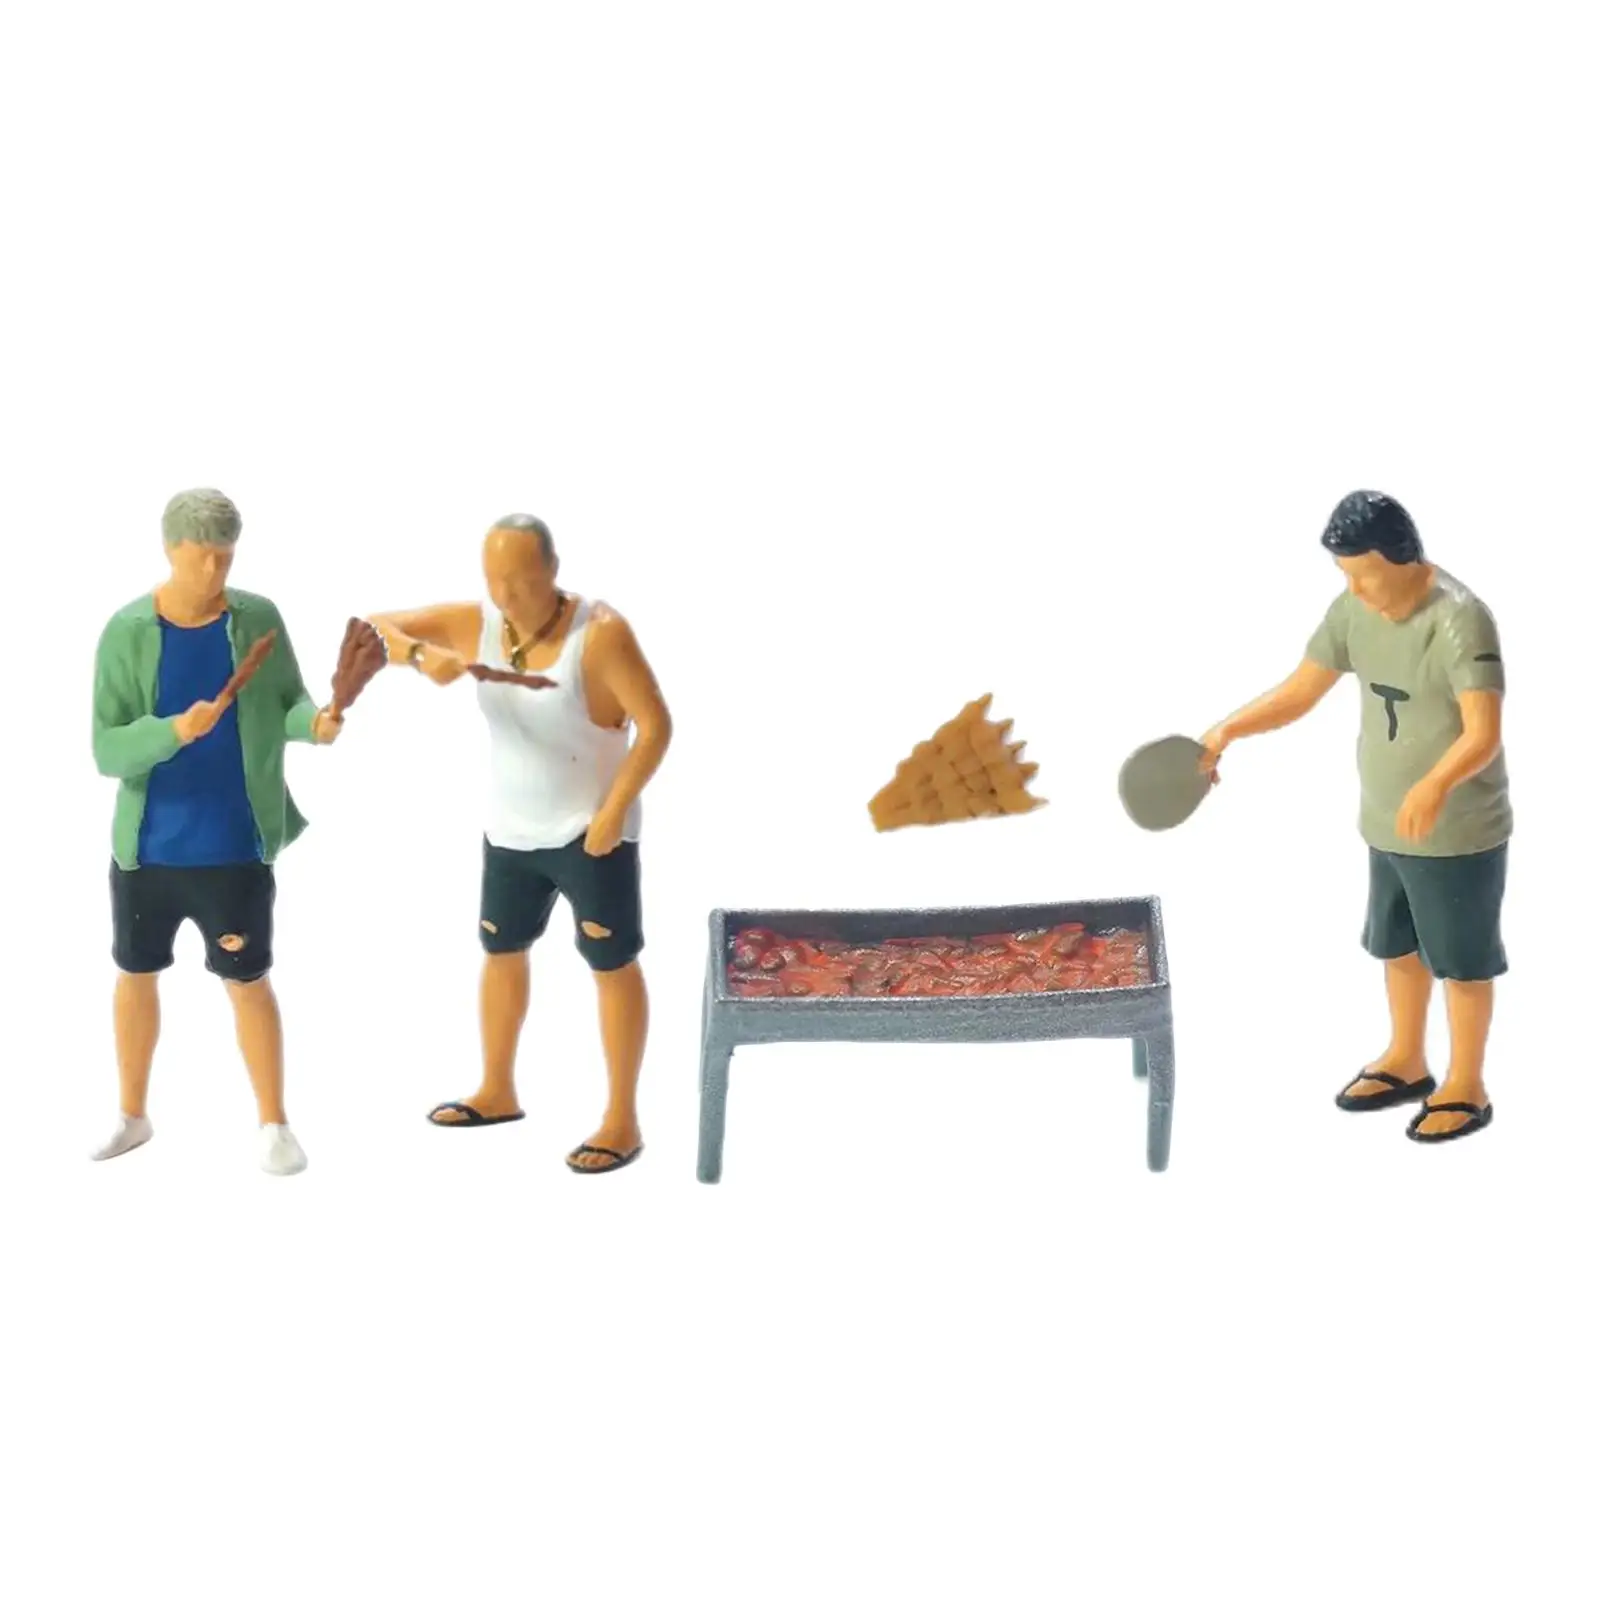 5x 1/64 BBQ Figure Model S Scale Movie Props Collections Layout with Accessories Train Railway Miniature Dioramas Decoration